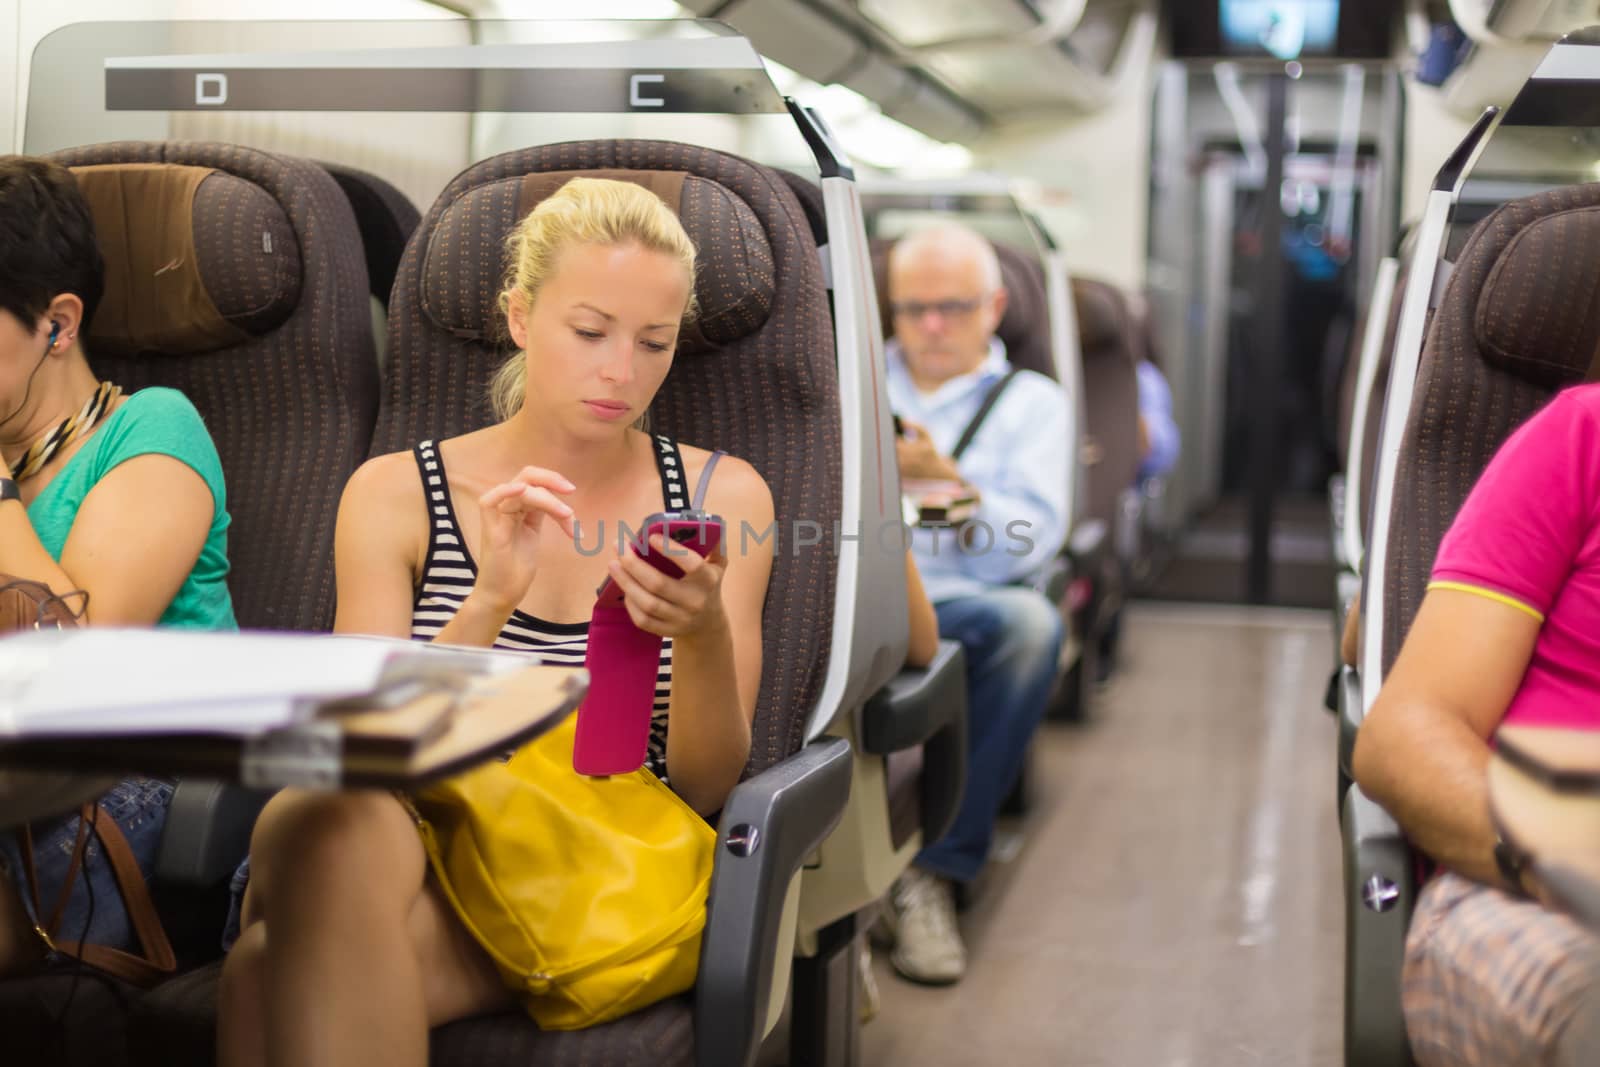 Thoughtful young lady surfing online on smartphone while traveling by train.